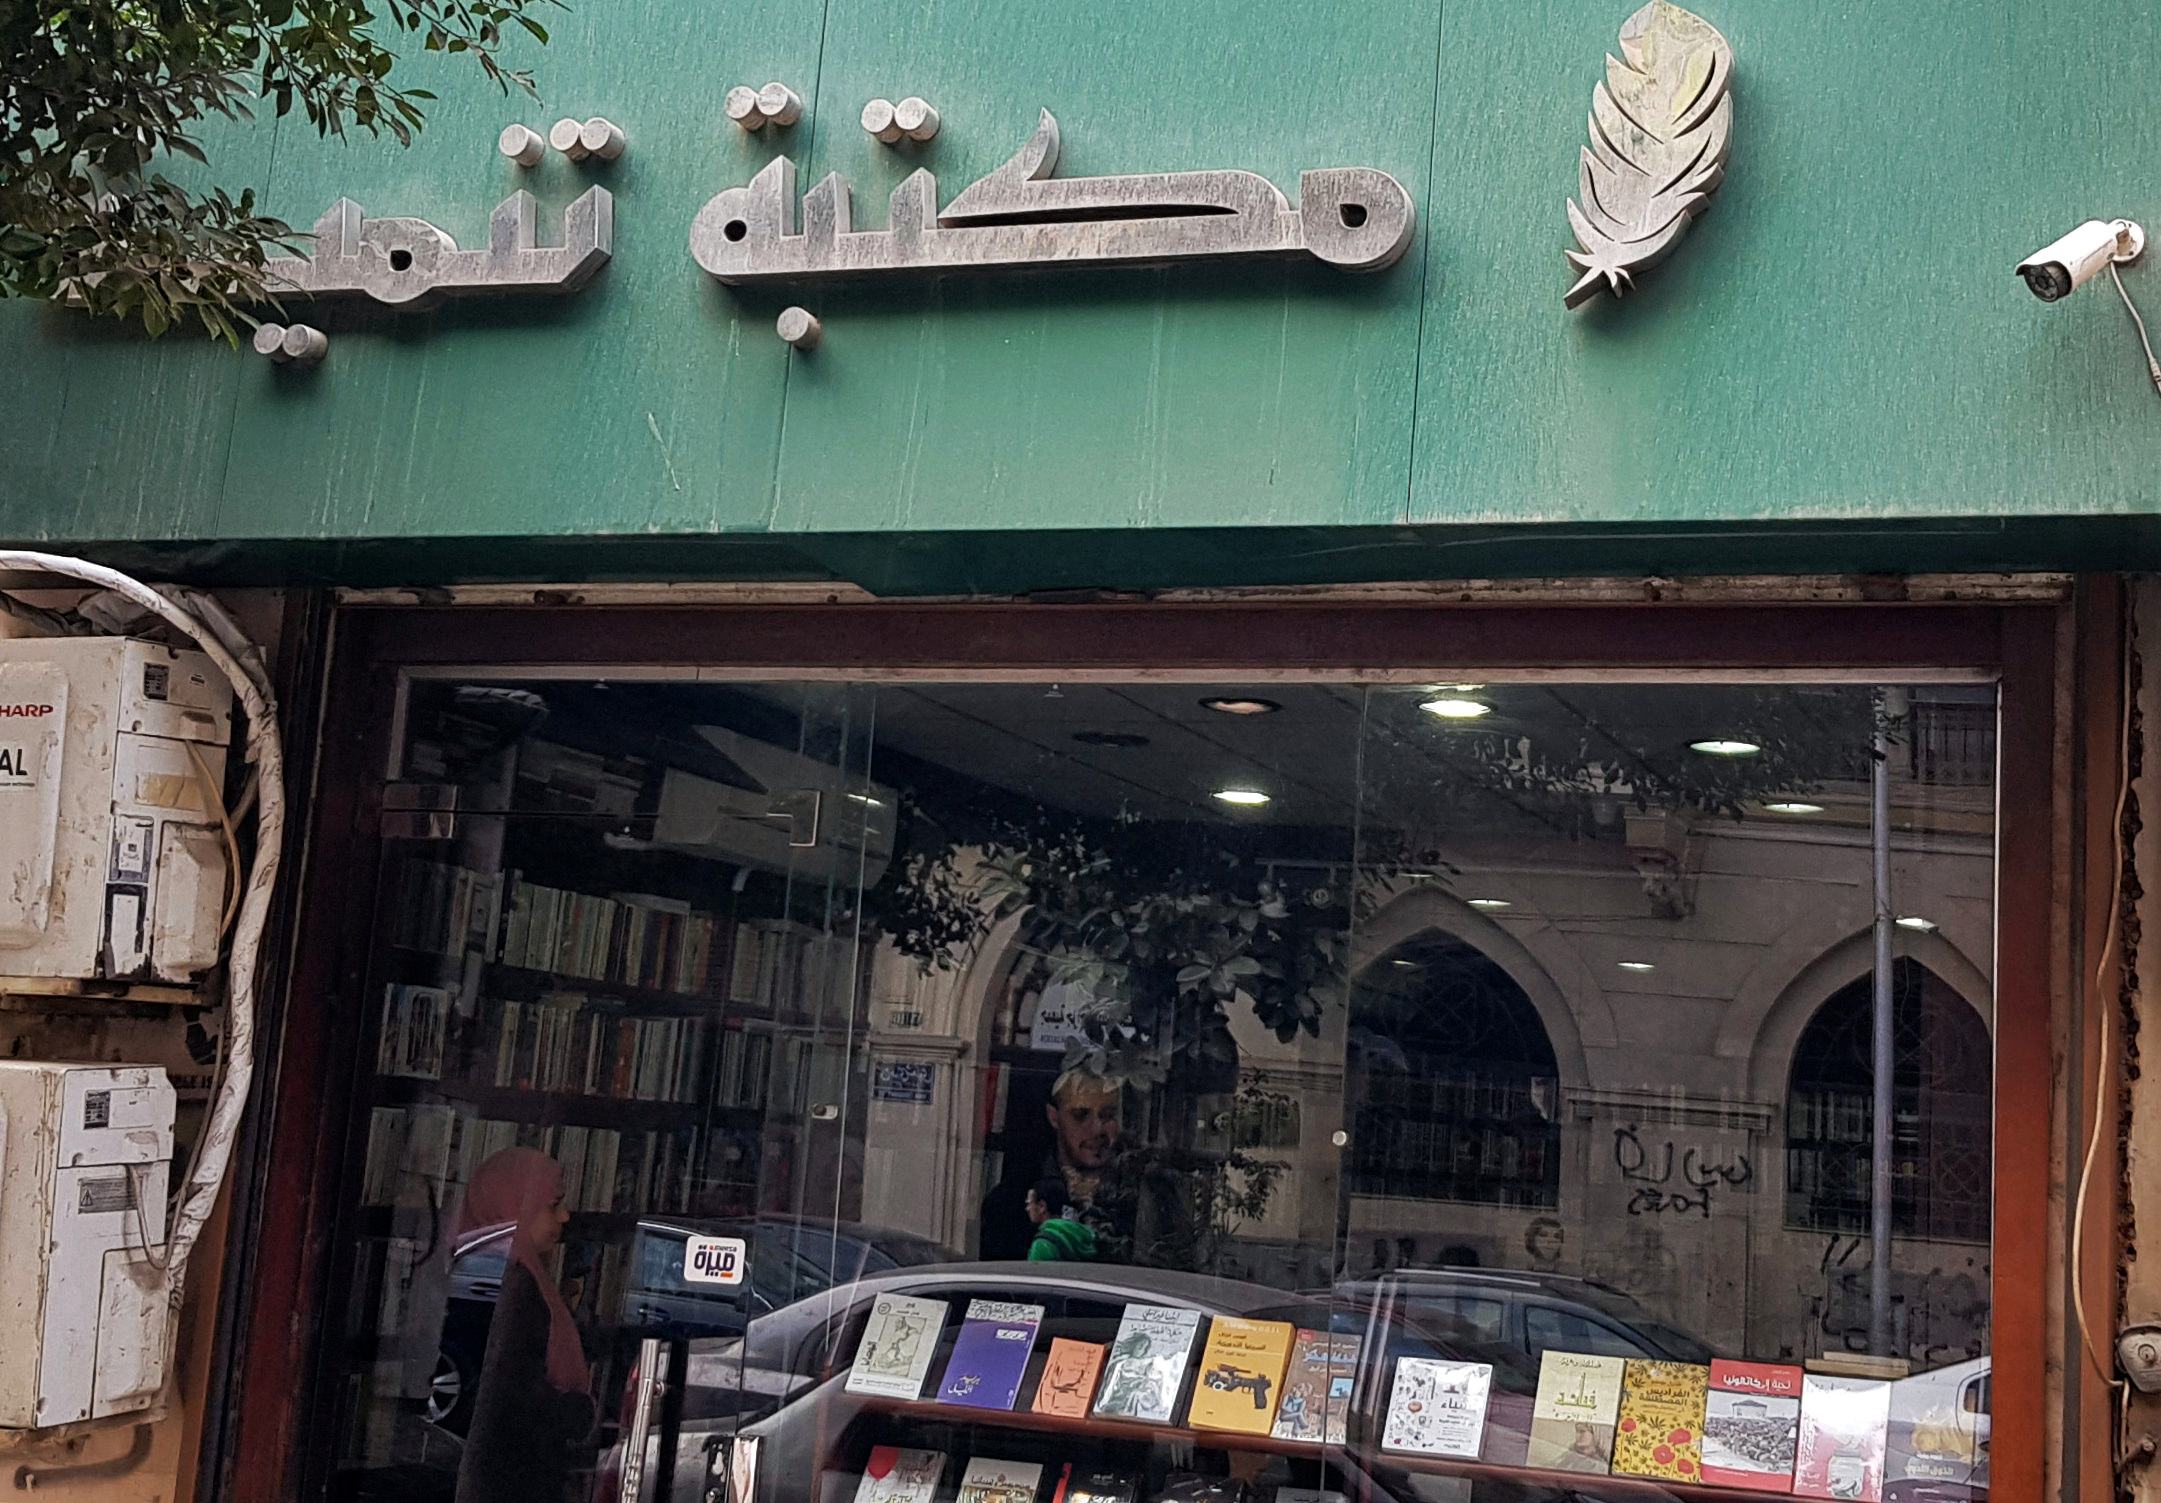 Tanmia bookshop and publishing house, owned by Egyptian publisher Khaled Lotfy, in downtown Cairo, Egypt (Reuters/Mahmoud Mourad)